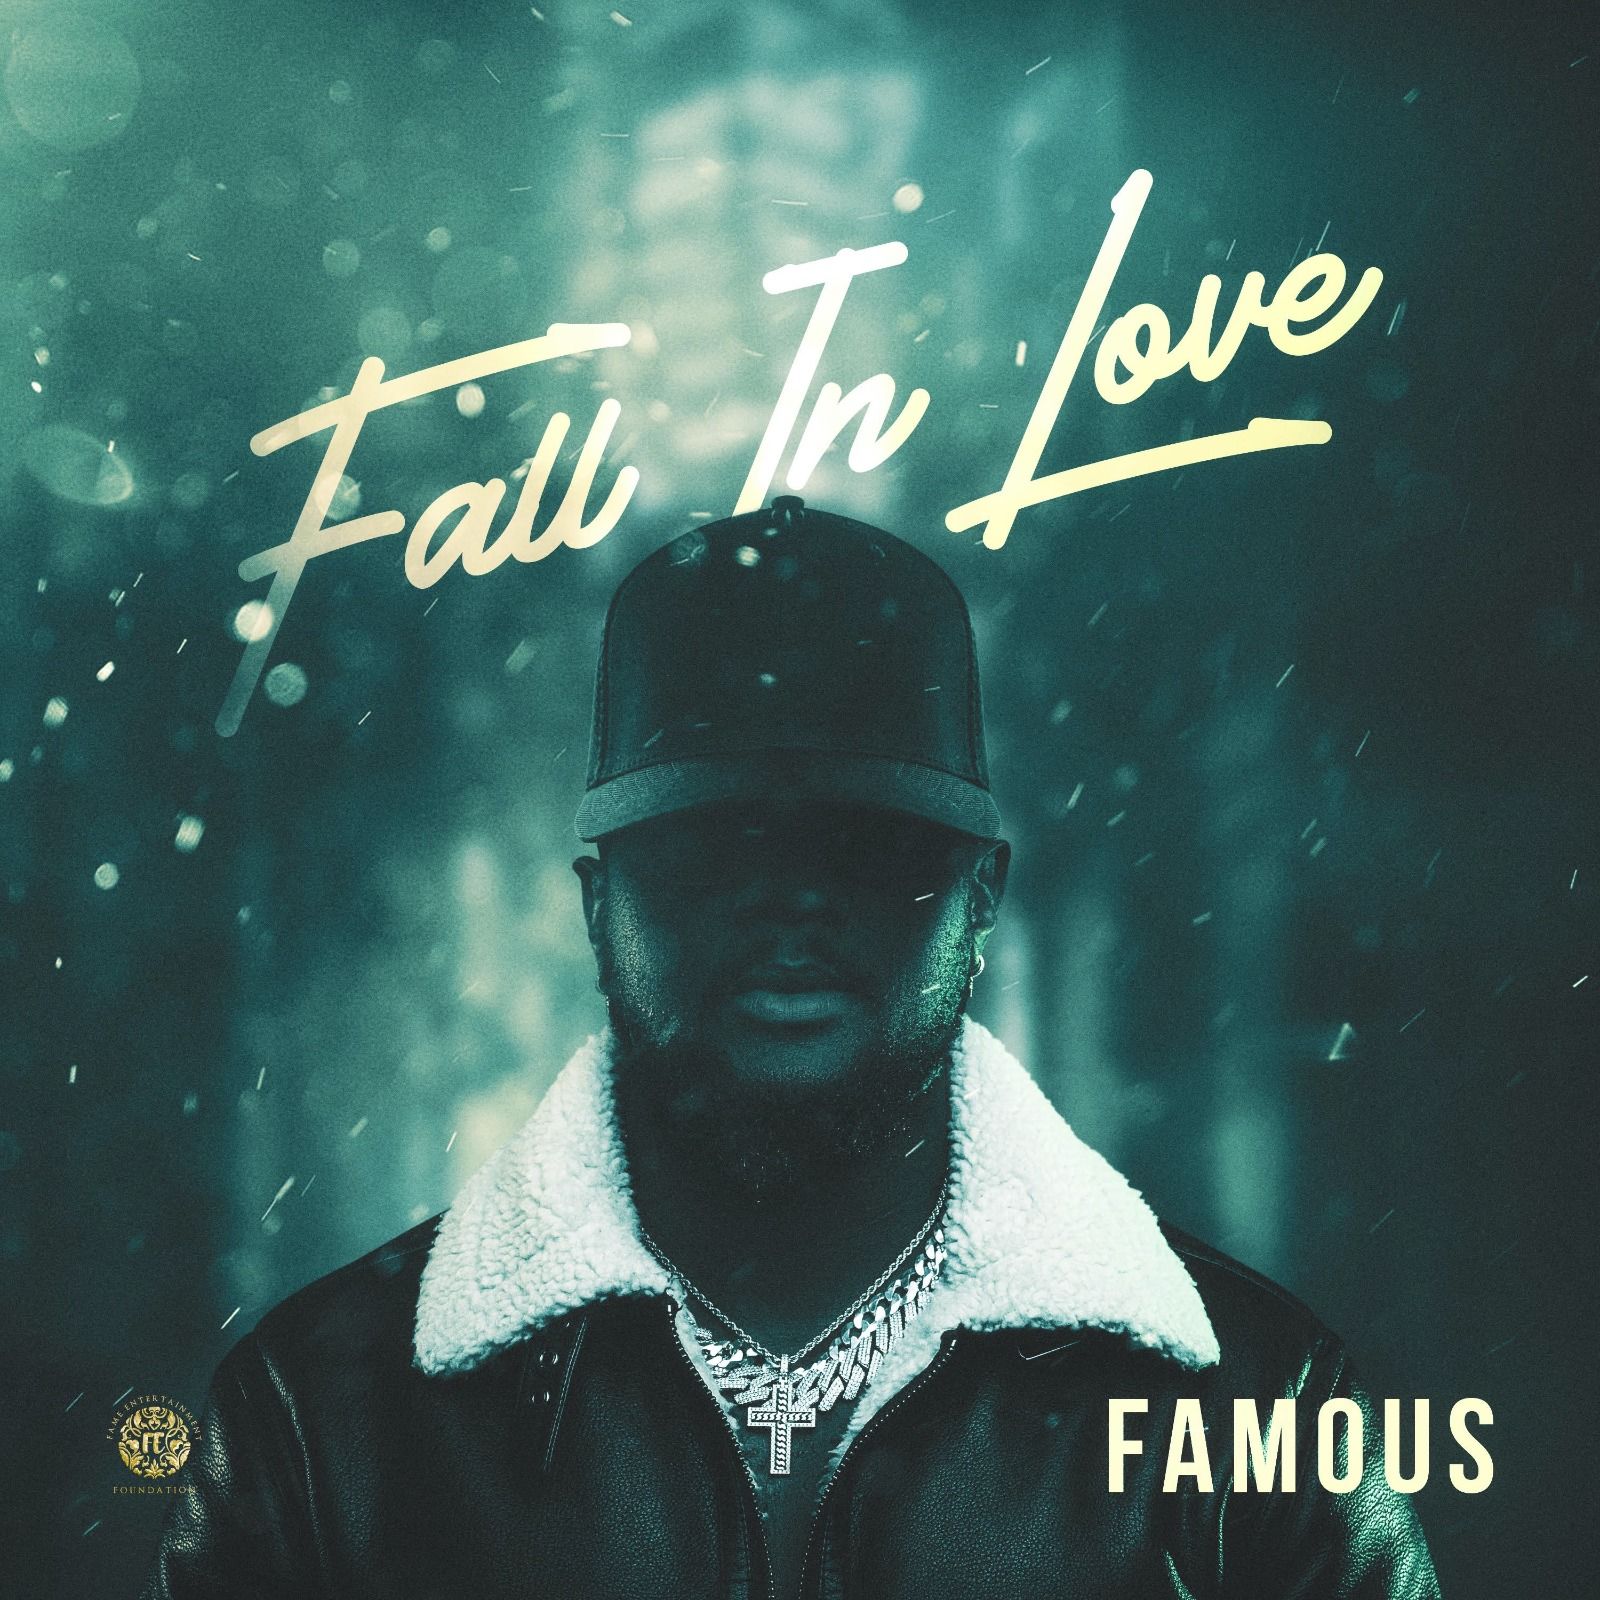 Famous SL - Fall in love